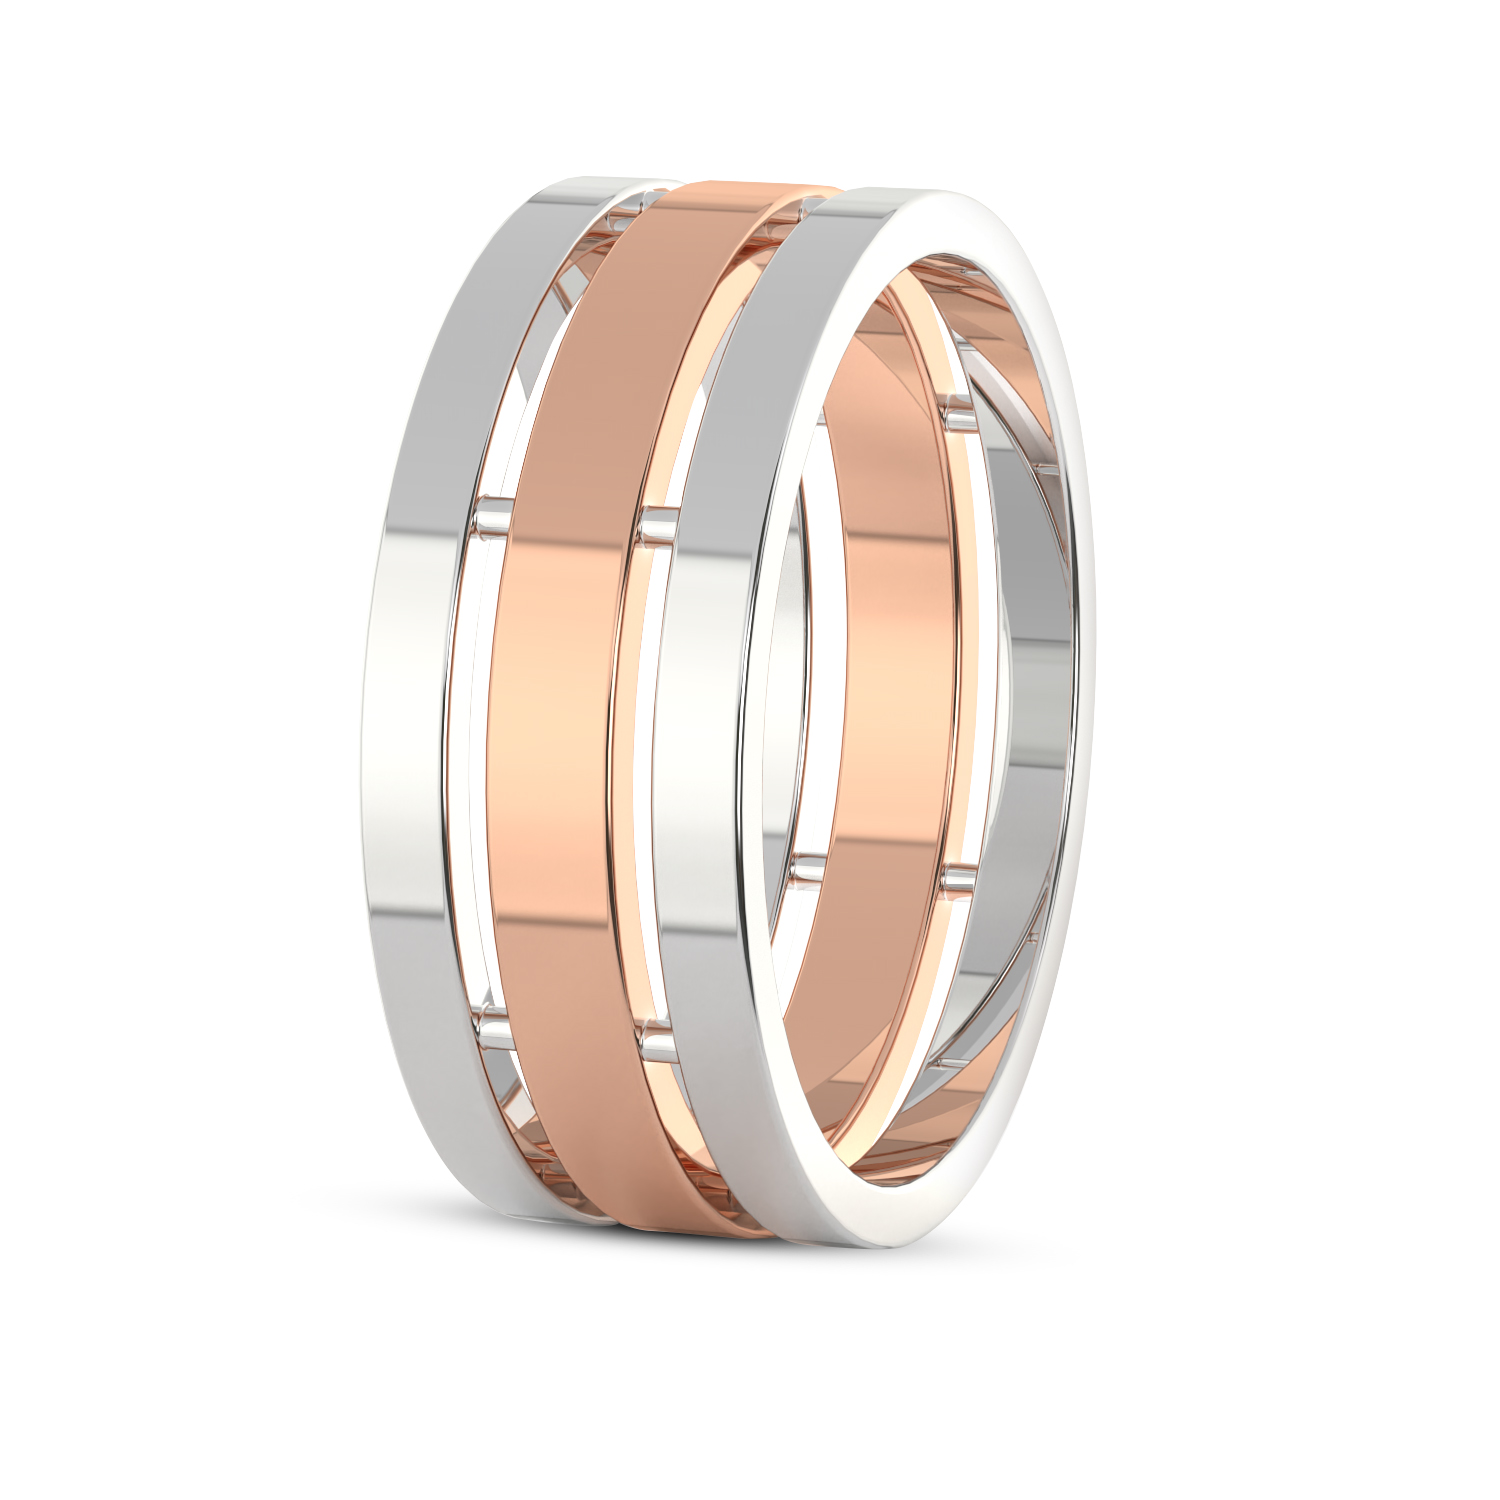 Unfading Love Couple Rings Left Side View